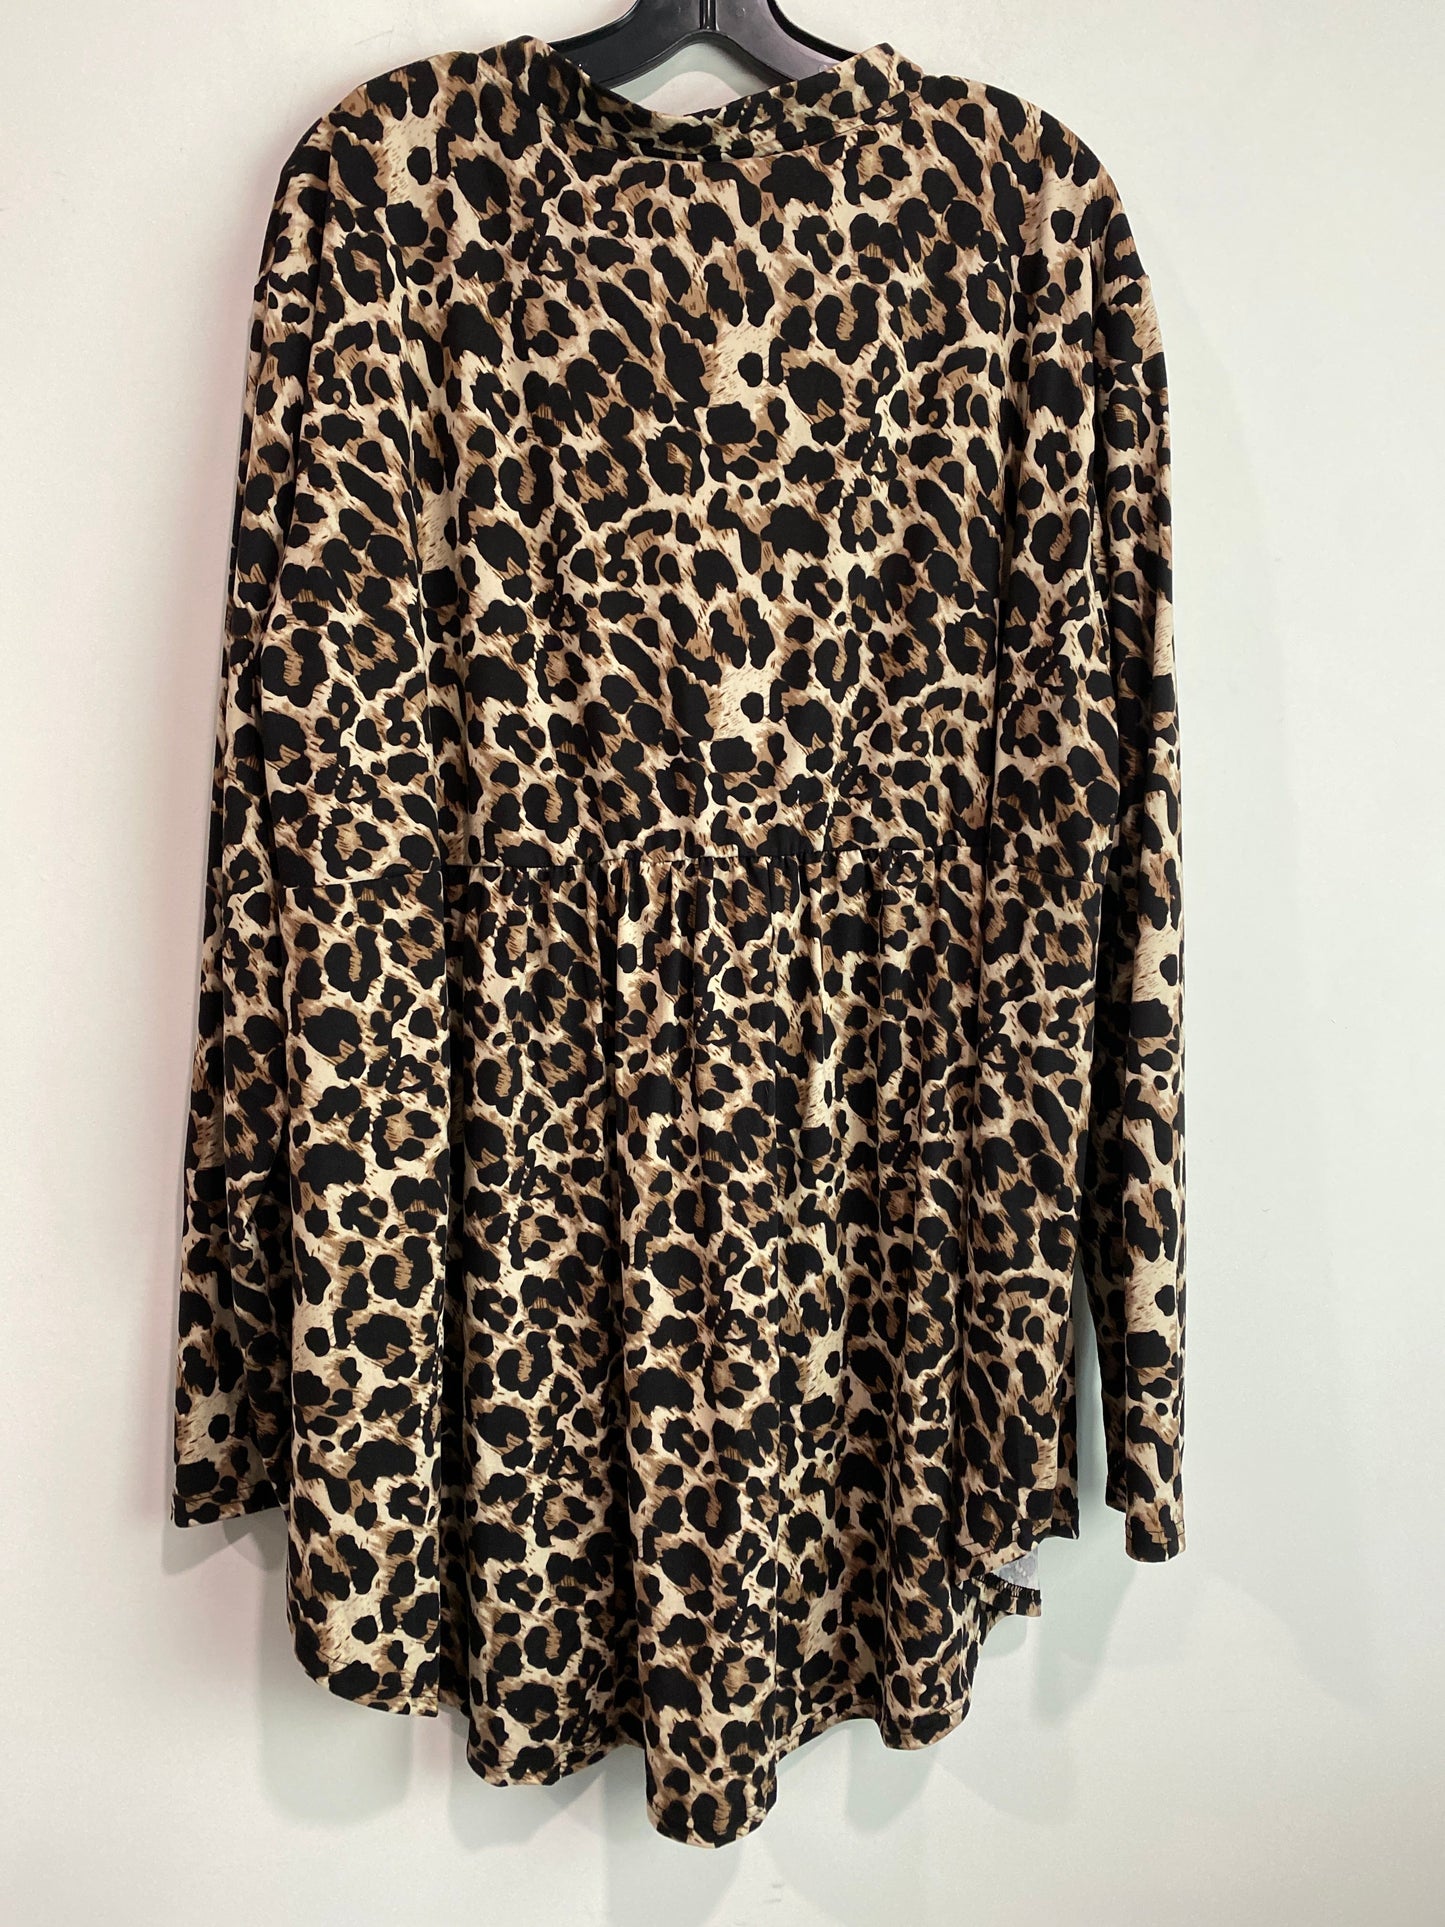 Animal Print Top Long Sleeve Clothes Mentor, Size 3x